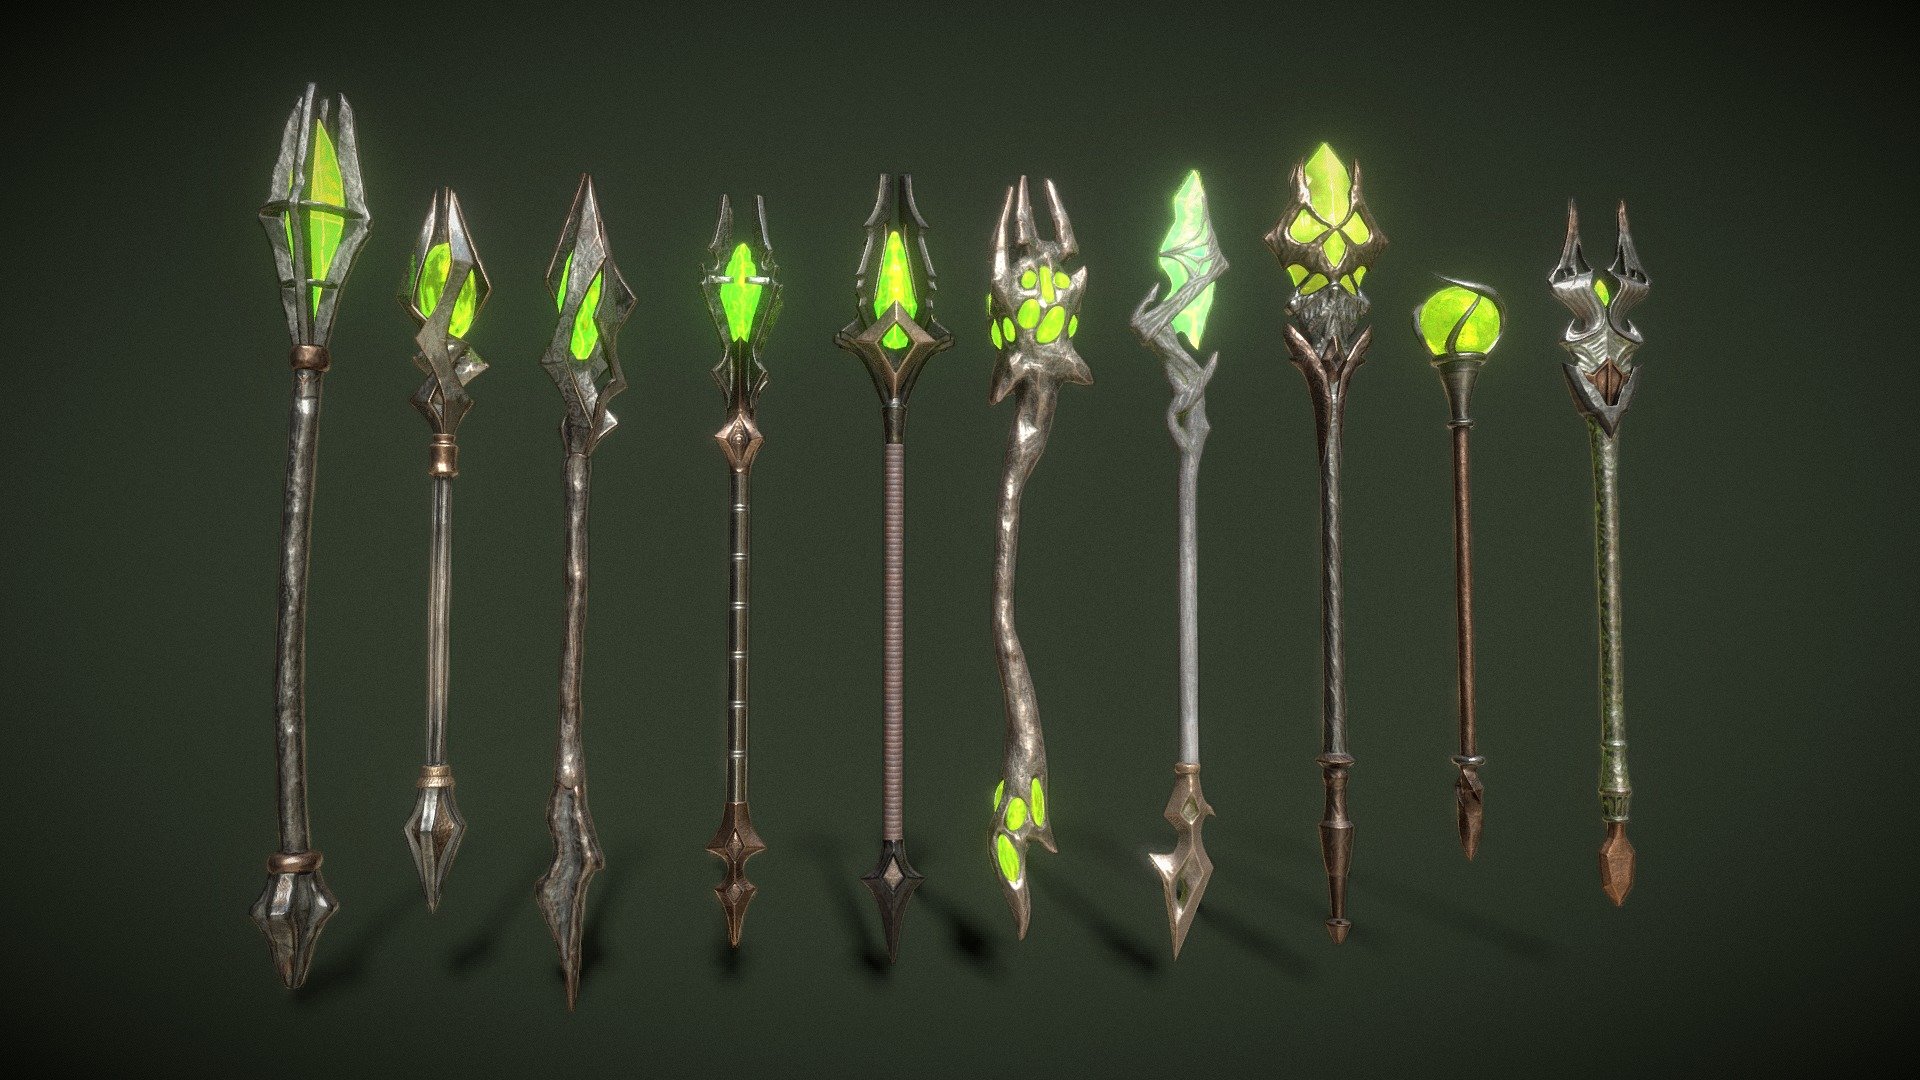 A set of quality staff models. Consists of 10 original objects. Each staff has a PBR texture with a resolution of 2048x2048.

Total polygons (triangles) 27564 

staff01 - 2220 

staff02 - 1924 

staff03 - 1724 

staff04 - 4304 

staff05 - 3376 

staff06 - 2652 

staff07 - 2284 

staff08 - 3776 

staff09 - 1856 

staff10 - 3448

The archive contains additional materials: FBX, OBJ, Blend files. 2k textures - PNG, JPG and PNG (Unity Metallic Smoothness) - Fantasy Staffs Pack02 - 3D model by zilbeerman 3d model